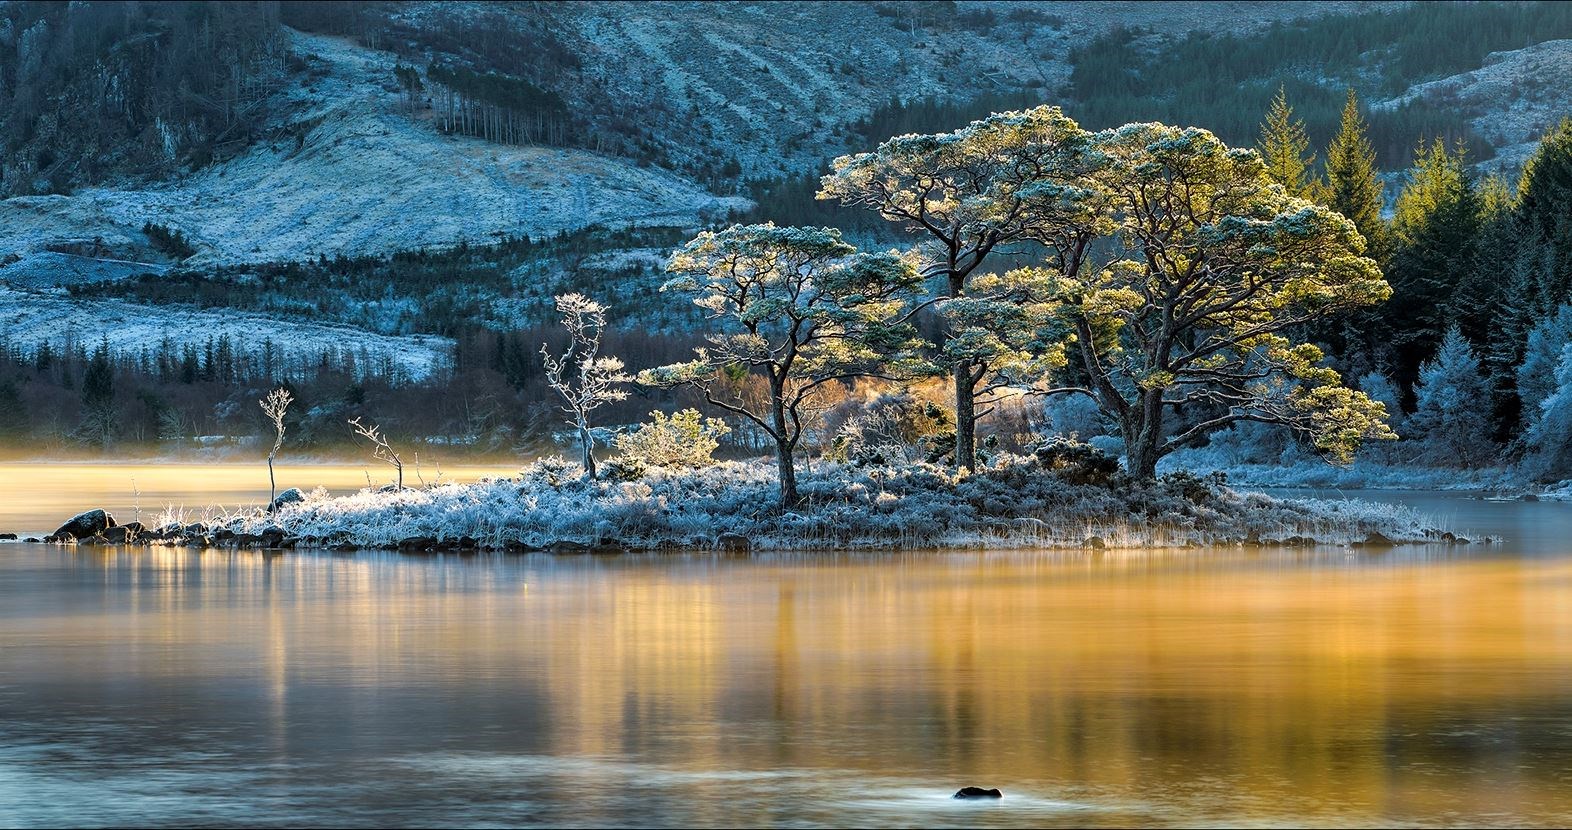 Gold Plated Pine Islands by Ian Cameron who lives near Forres.